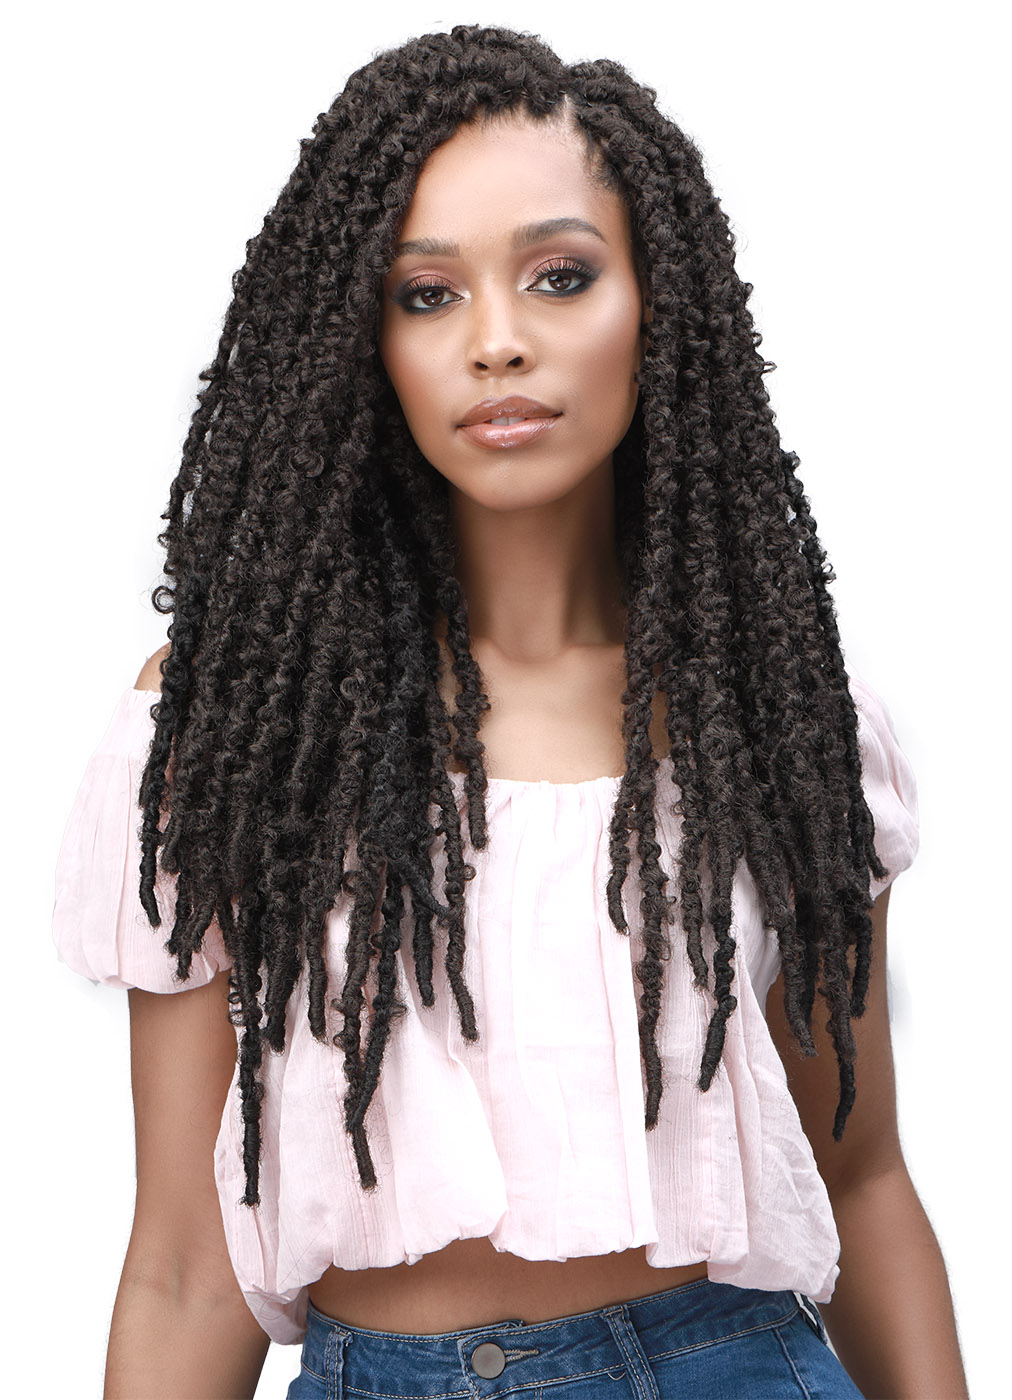 CALIF. BUTTERFLY LOCS 18"